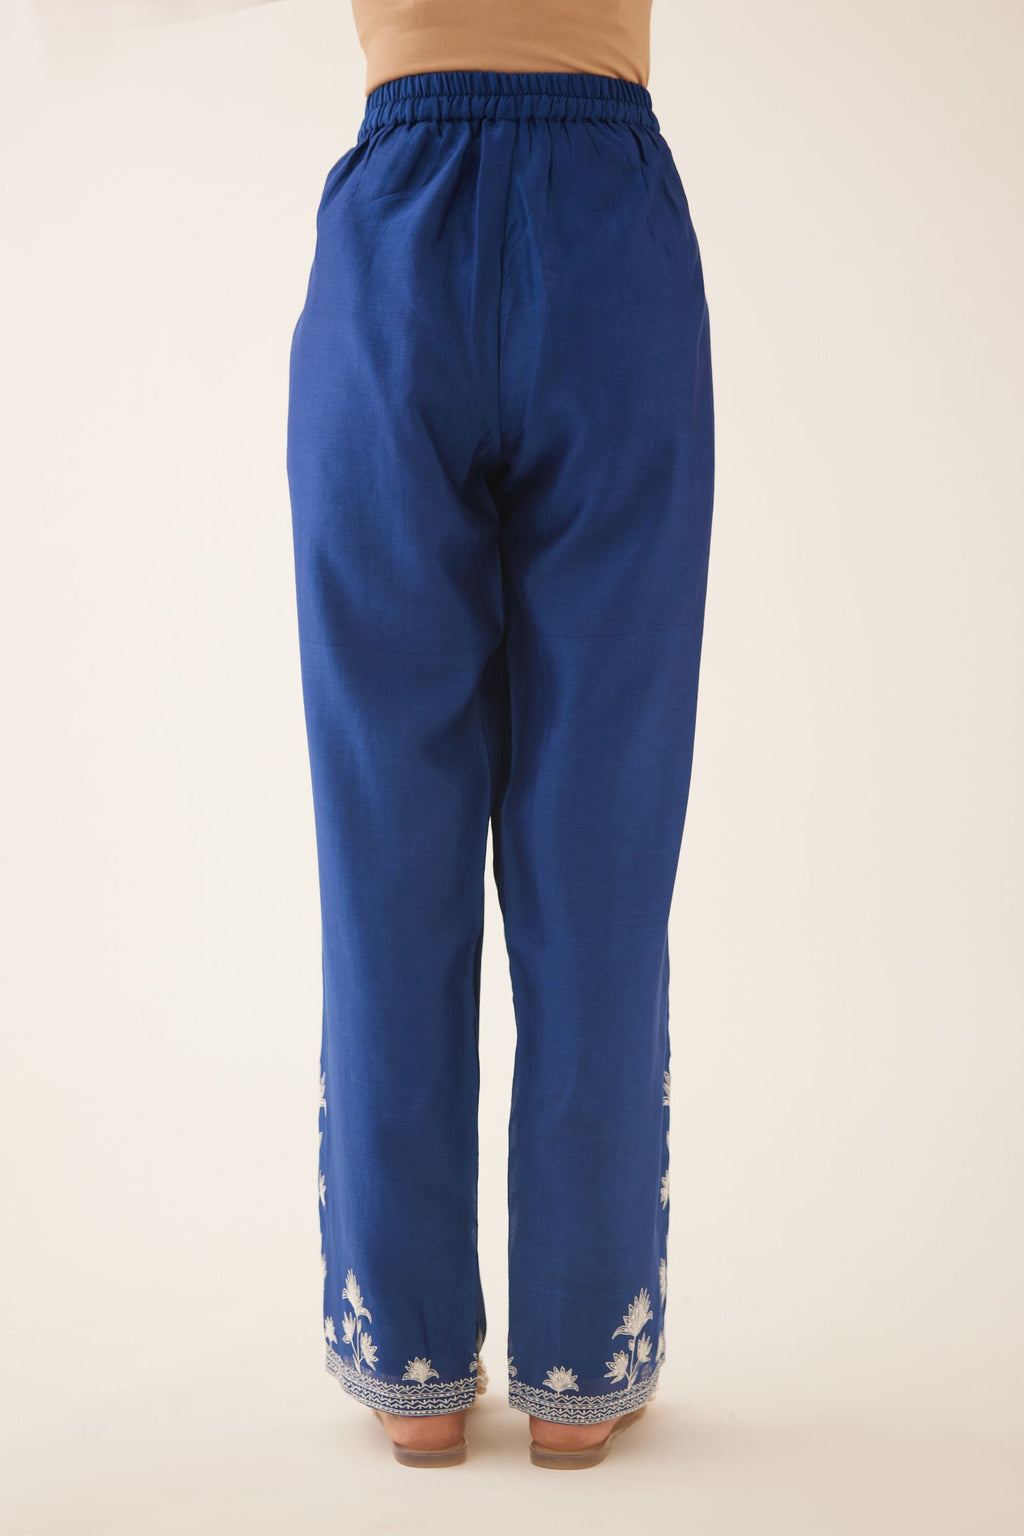 Blue silk chanderi straight pants with off white silk thread embroidery at hem.